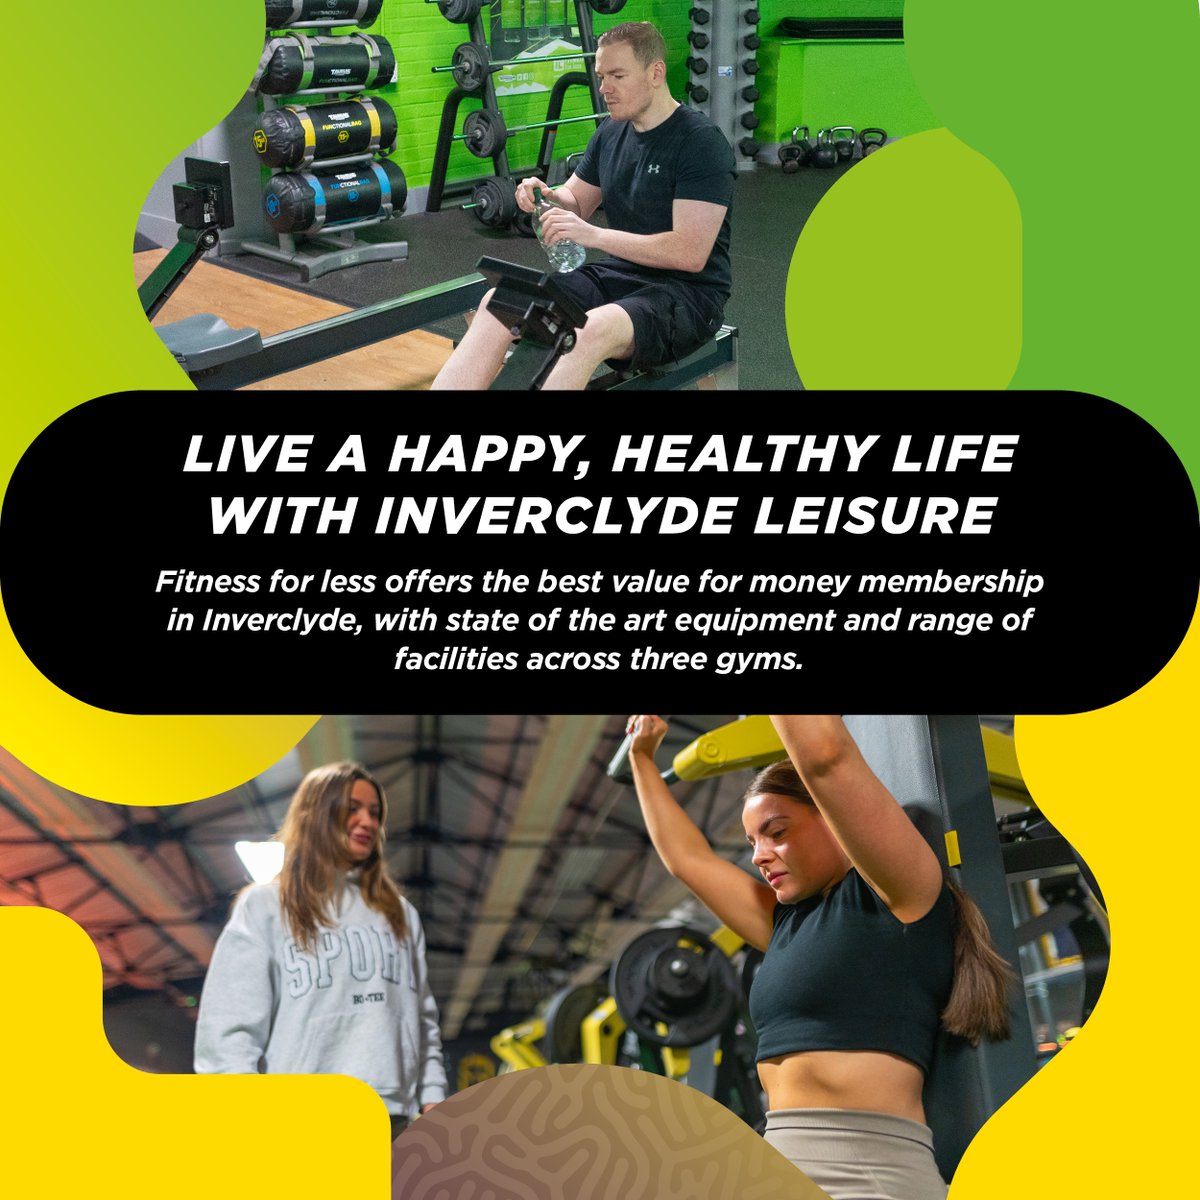 Live a happy, healthy life with Fitness For Less from Inverclyde Leisure 💙 Enjoy facilities across our three Fitness For Less gyms from as little as £16.99 per month, with £0 joining fee 🙌 Find out more 👇 inverclydeleisure.com/gym/fitness-fo…